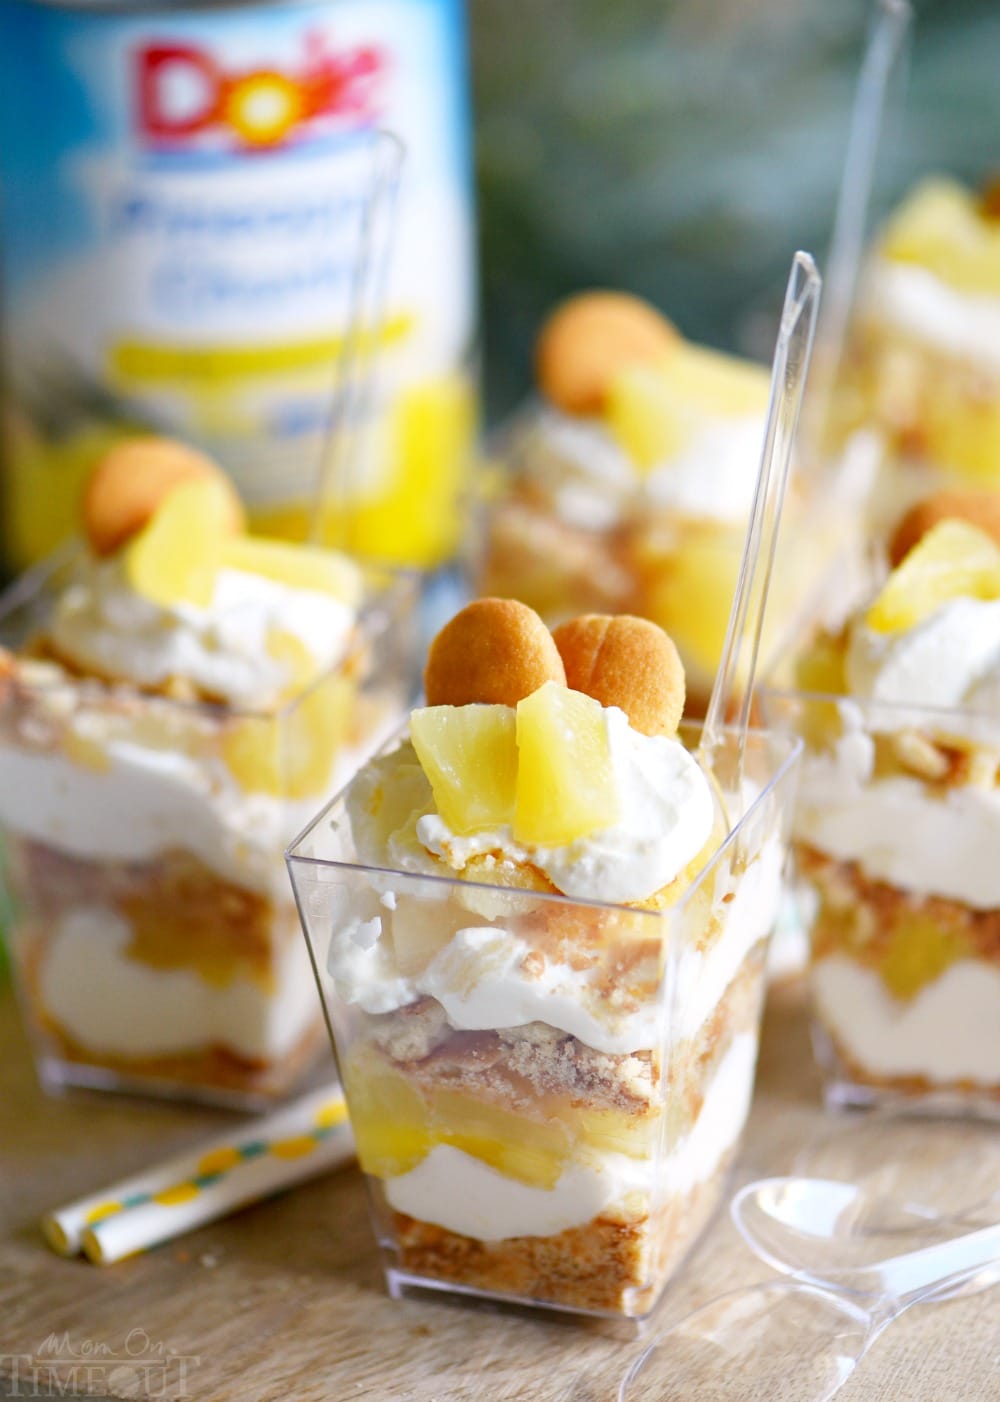 These Mini Pineapple Cheesecake Trifles are loaded with pineapple flavor! Perfect for an after-school snack, dessert, or party! // Mom On Timeout